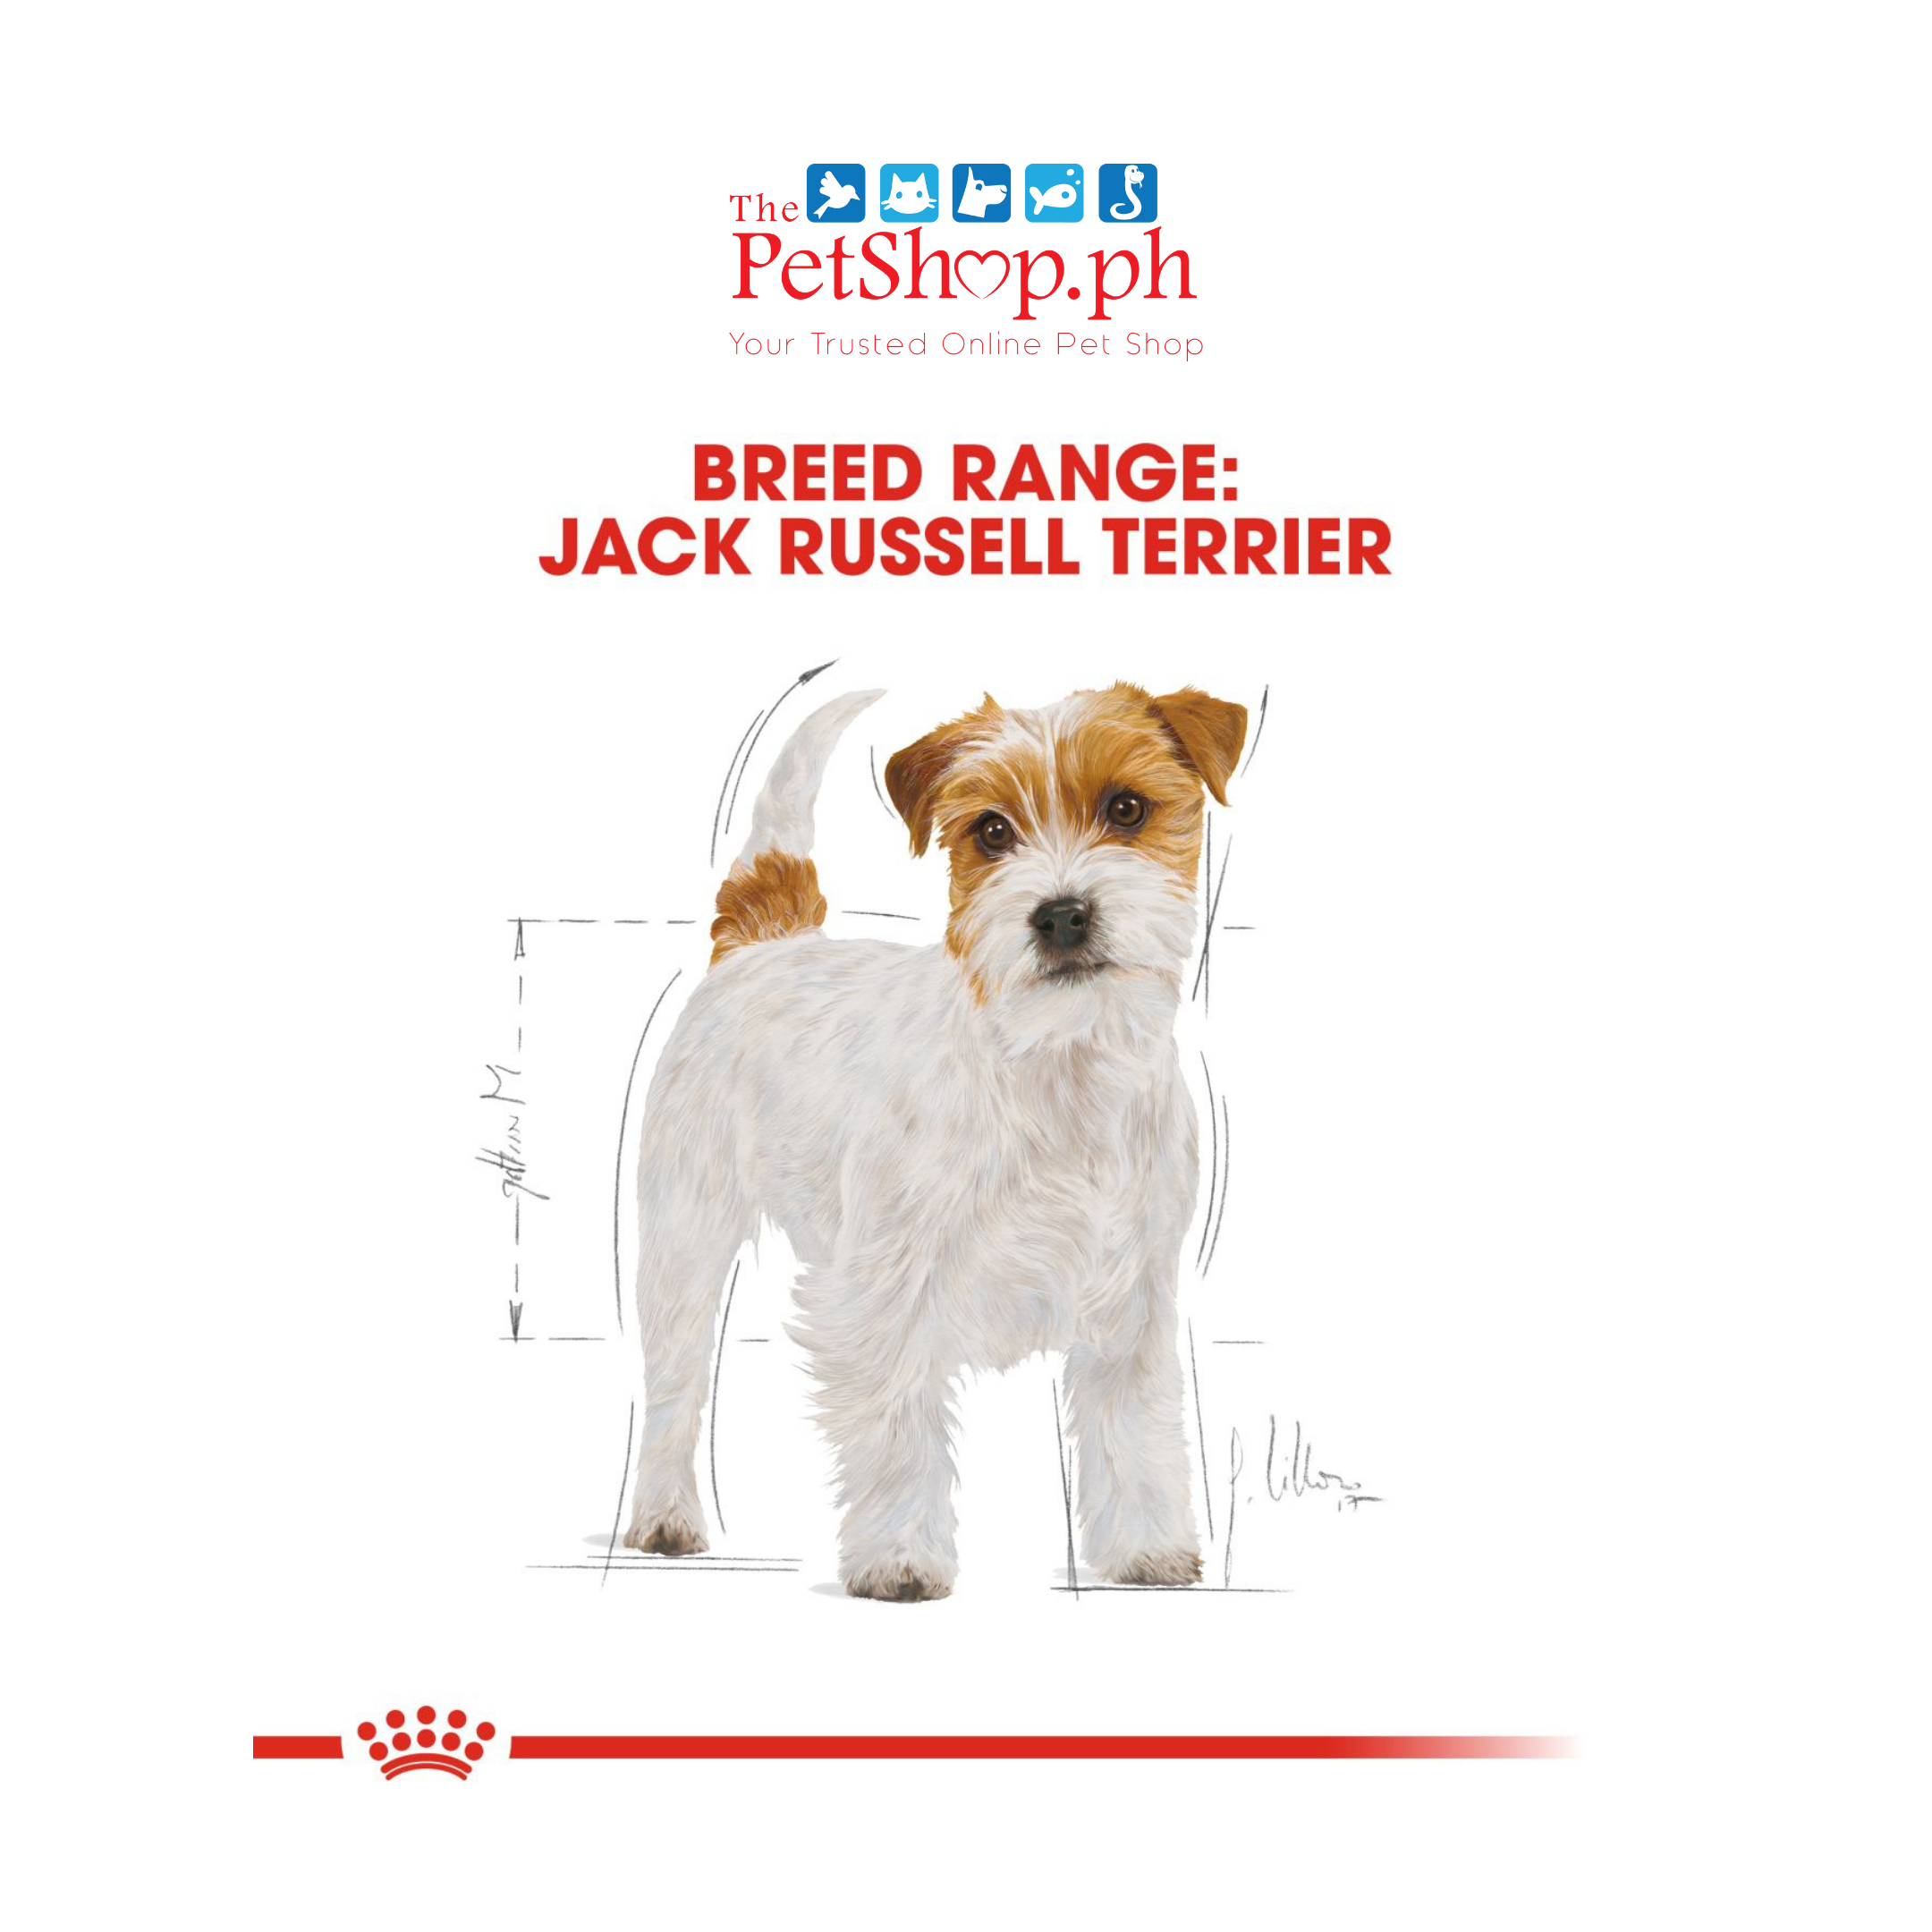 Royal Canin Jack Russell Terrier Adult 500g - Dry Dog Food Breed Health Nutrition